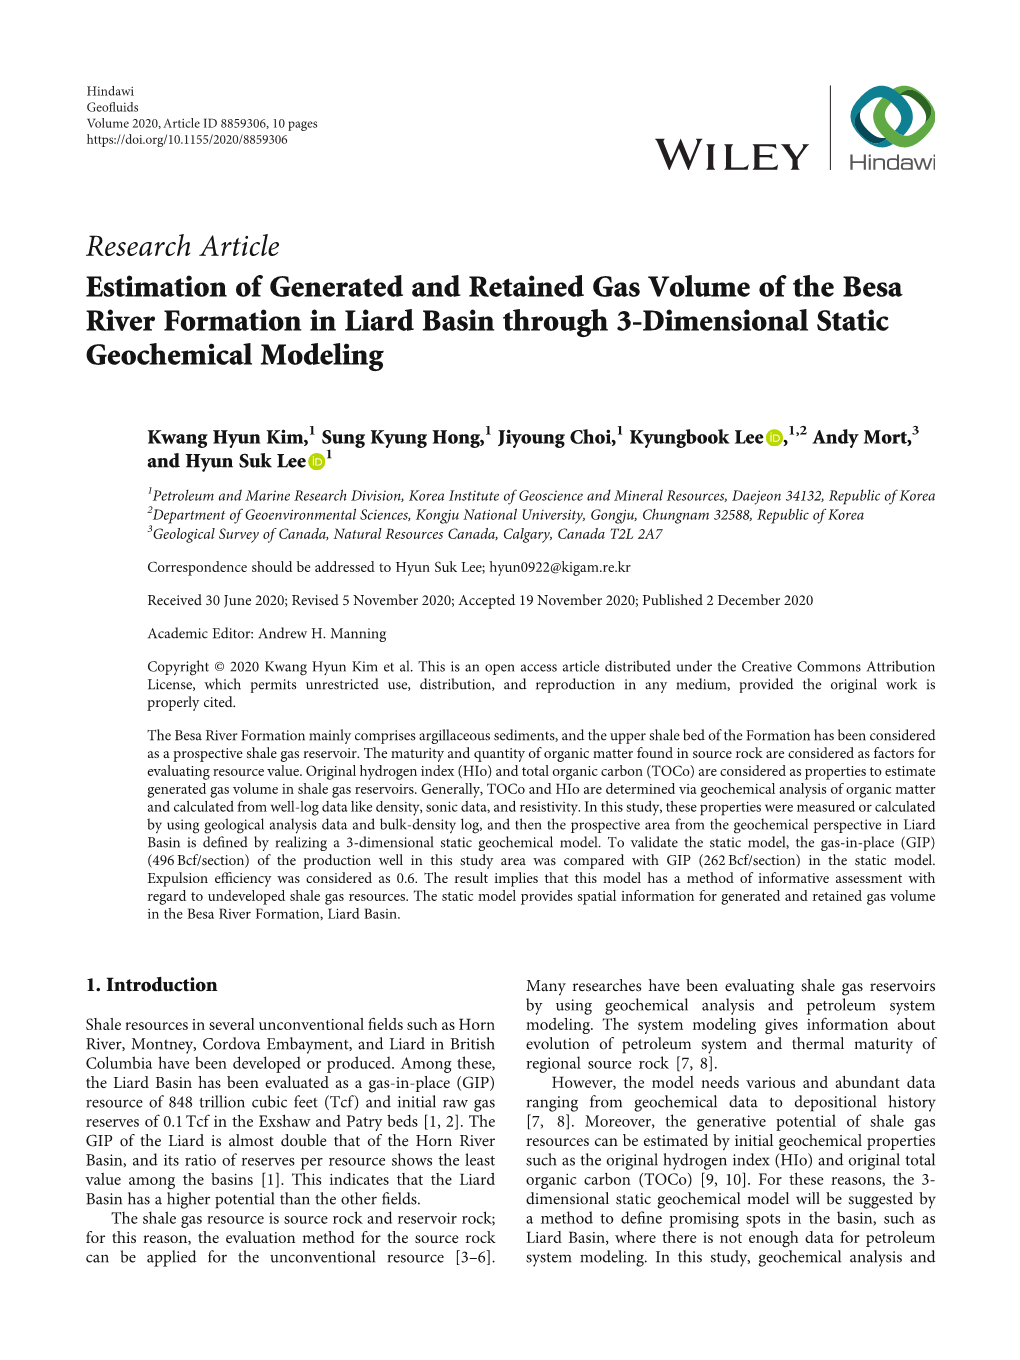 Estimation of Generated and Retained Gas Volume of the Besa River Formation in Liard Basin Through 3-Dimensional Static Geochemical Modeling